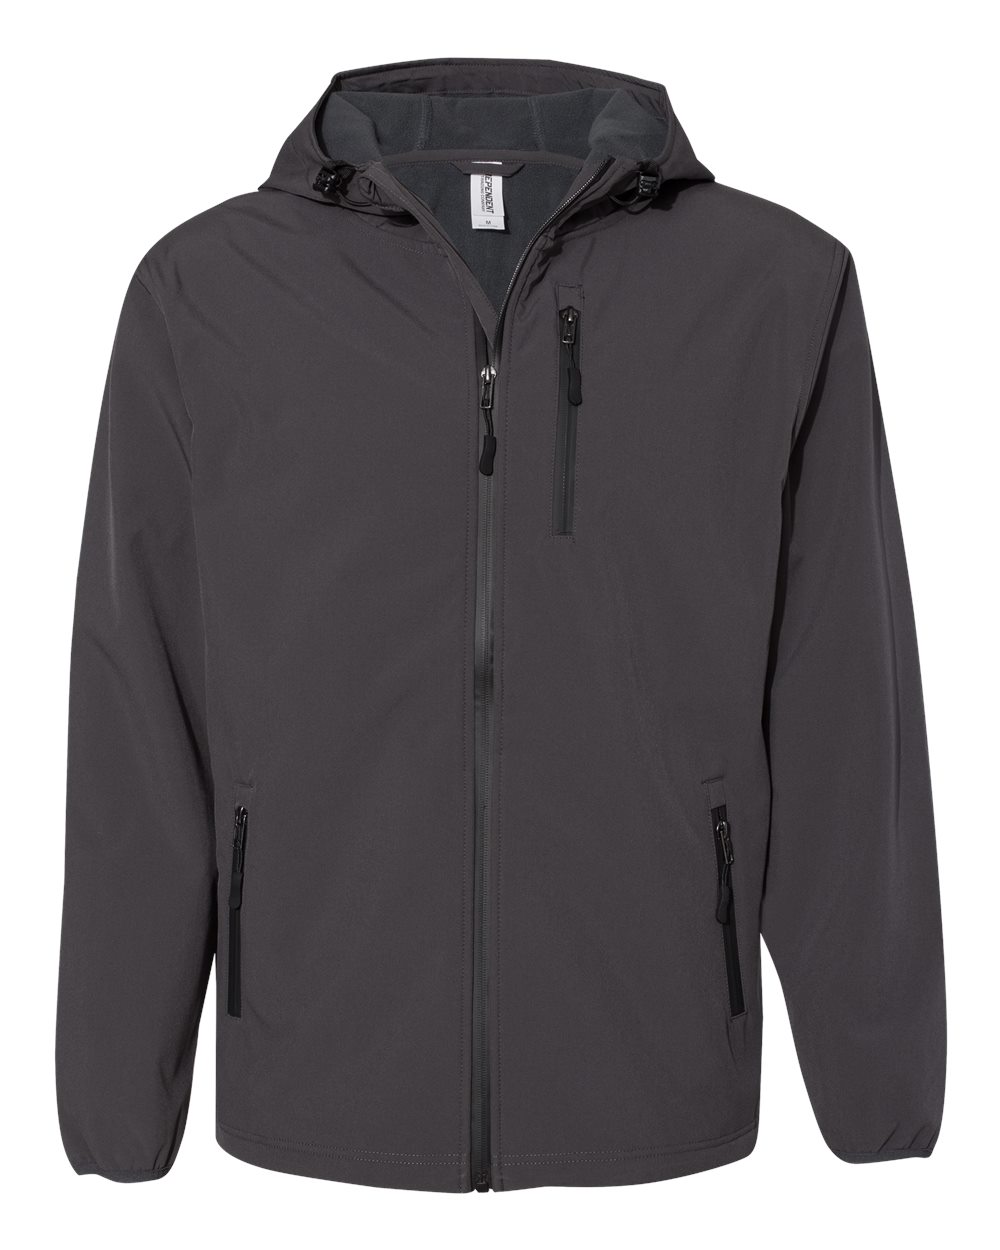 Buy Poly-Tech Soft Shell Jacket - Independent Trading Co. Online at ...